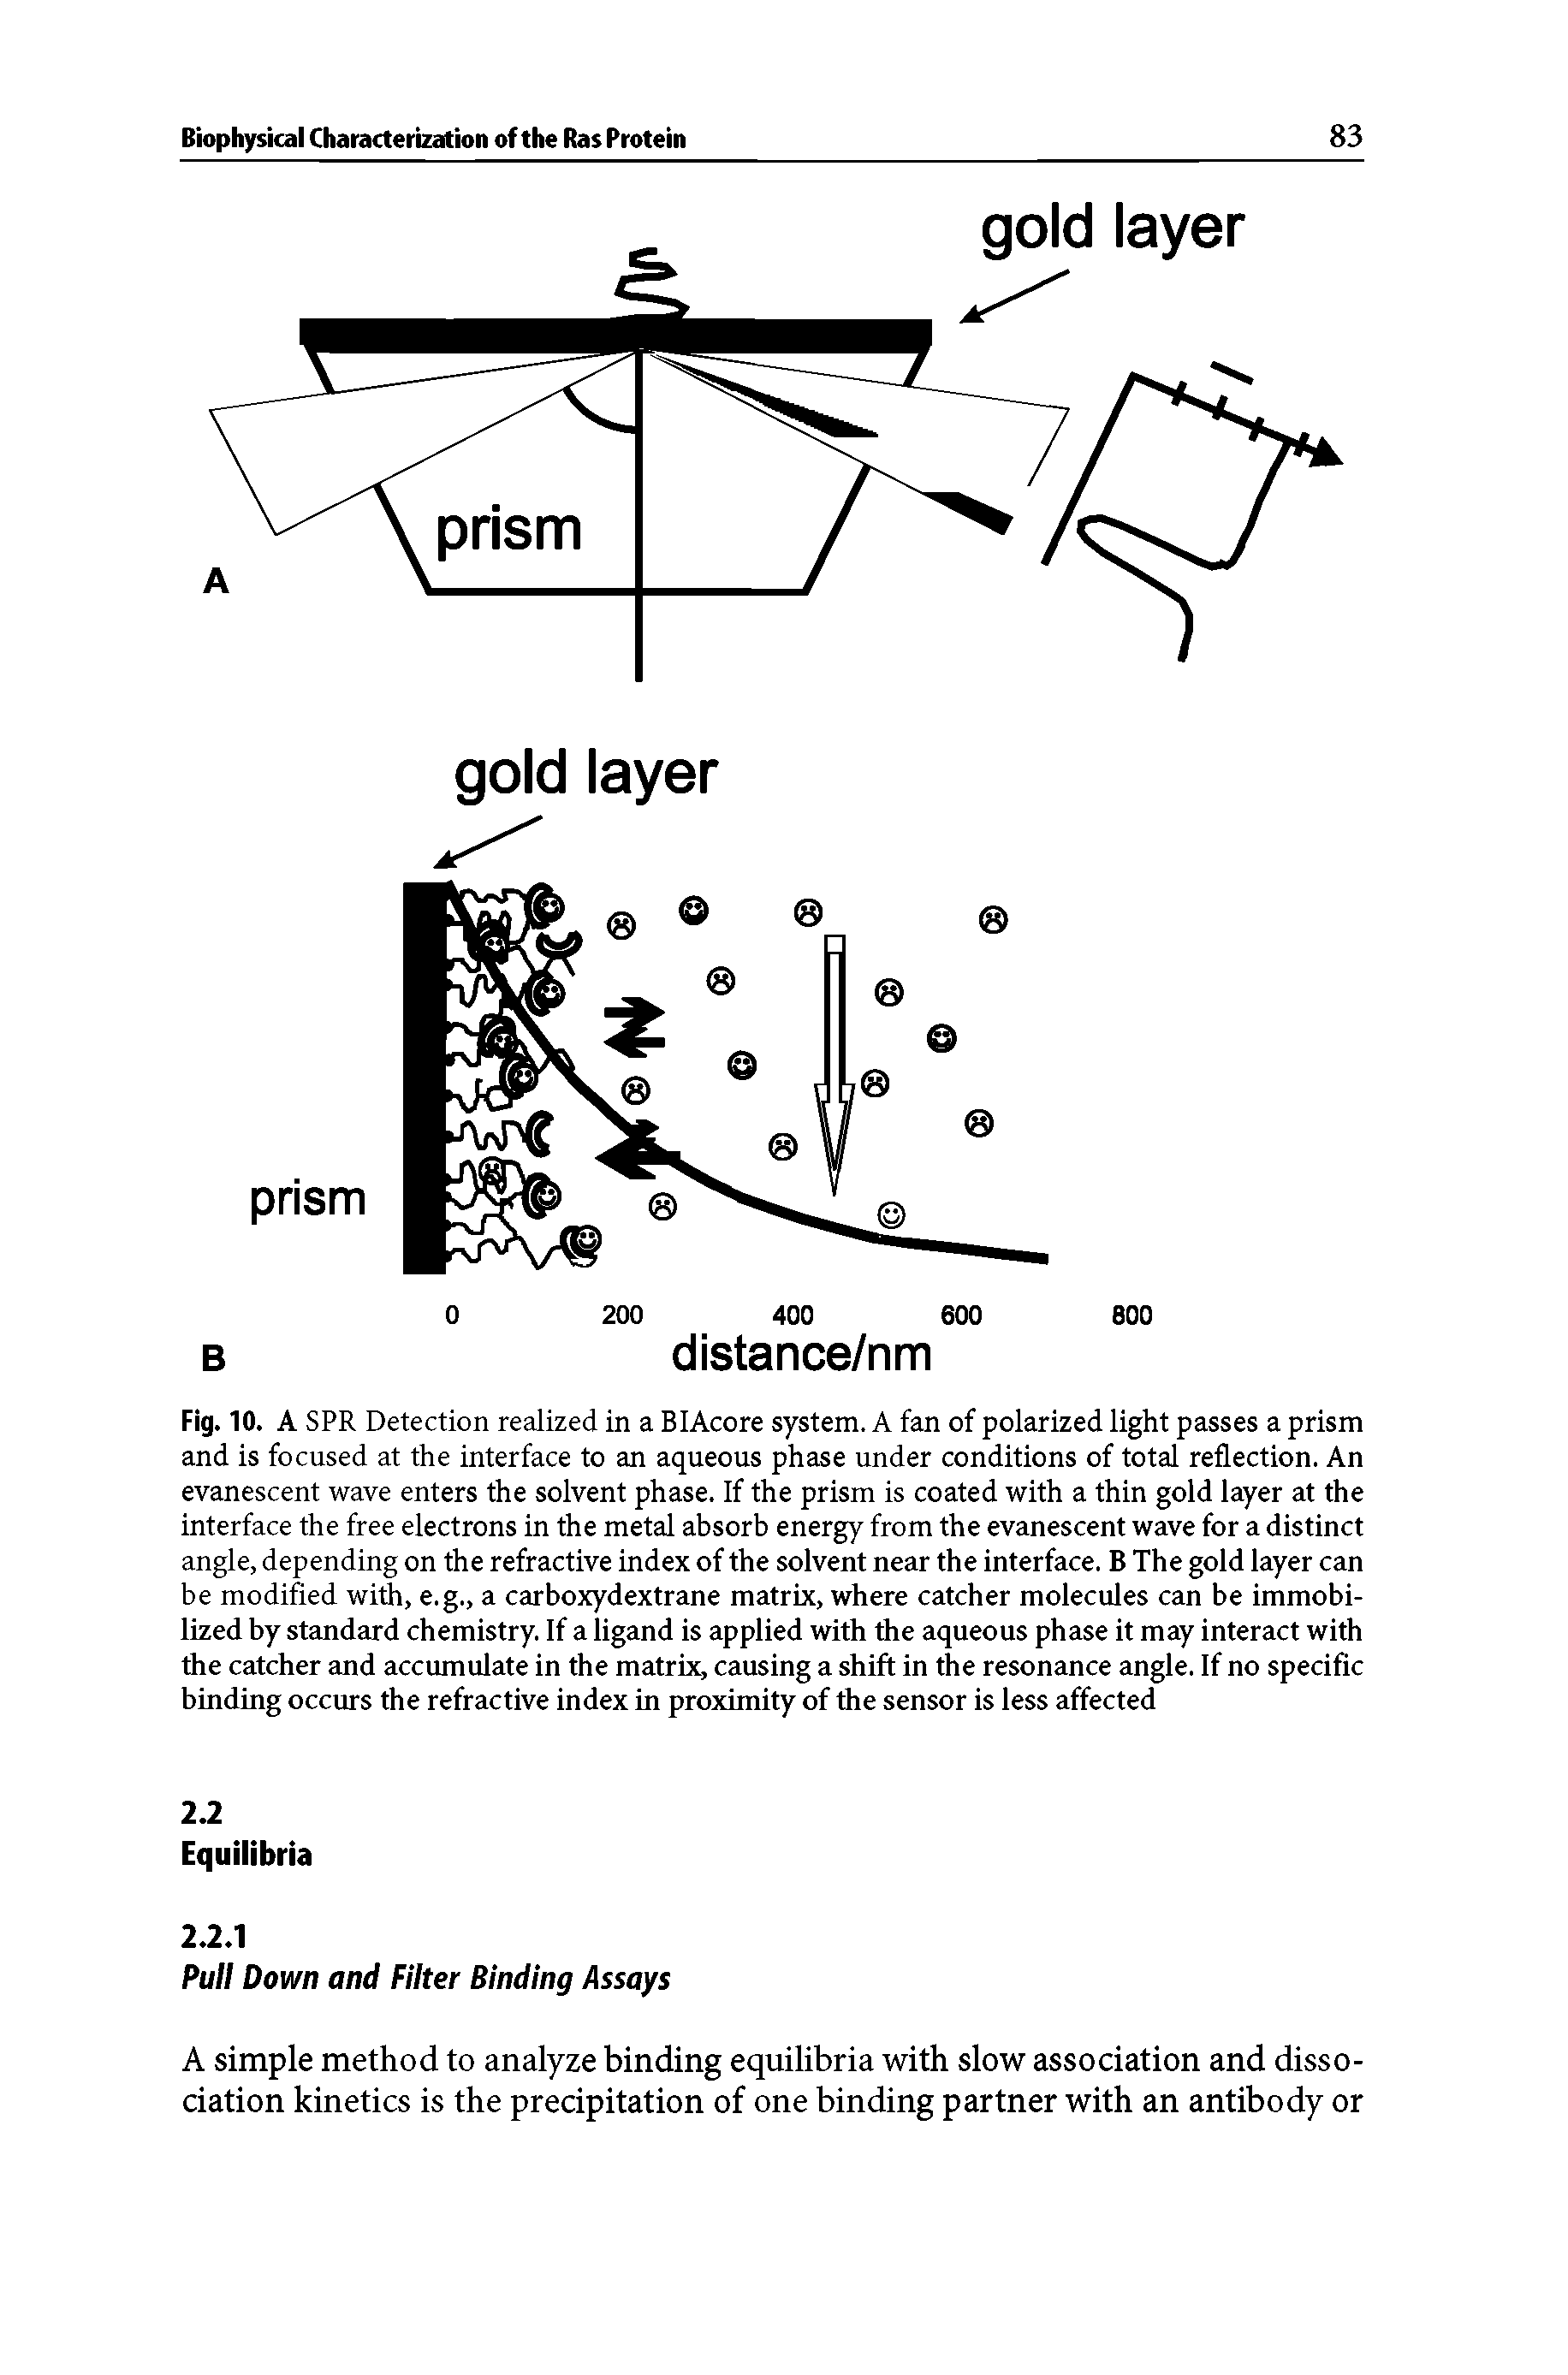 Fig. 10. A SPR Detection realized in a BIAcore system. A fan of polarized light passes a prism and is focused at the interface to an aqueous phase under conditions of total reflection. An evanescent wave enters the solvent phase. If the prism is coated with a thin gold layer at the interface the free electrons in the metal absorb energy from the evanescent wave for a distinct angle, depending on the refractive index of the solvent near the interface. B The gold layer can be modified with, e.g., a carboxydextrane matrix, where catcher molecules can be immobilized by standard chemistry. If a ligand is applied with the aqueous phase it may interact with the catcher and accumulate in the matrix, causing a shift in the resonance angle. If no specific binding occurs the refractive index in proximity of the sensor is less affected...